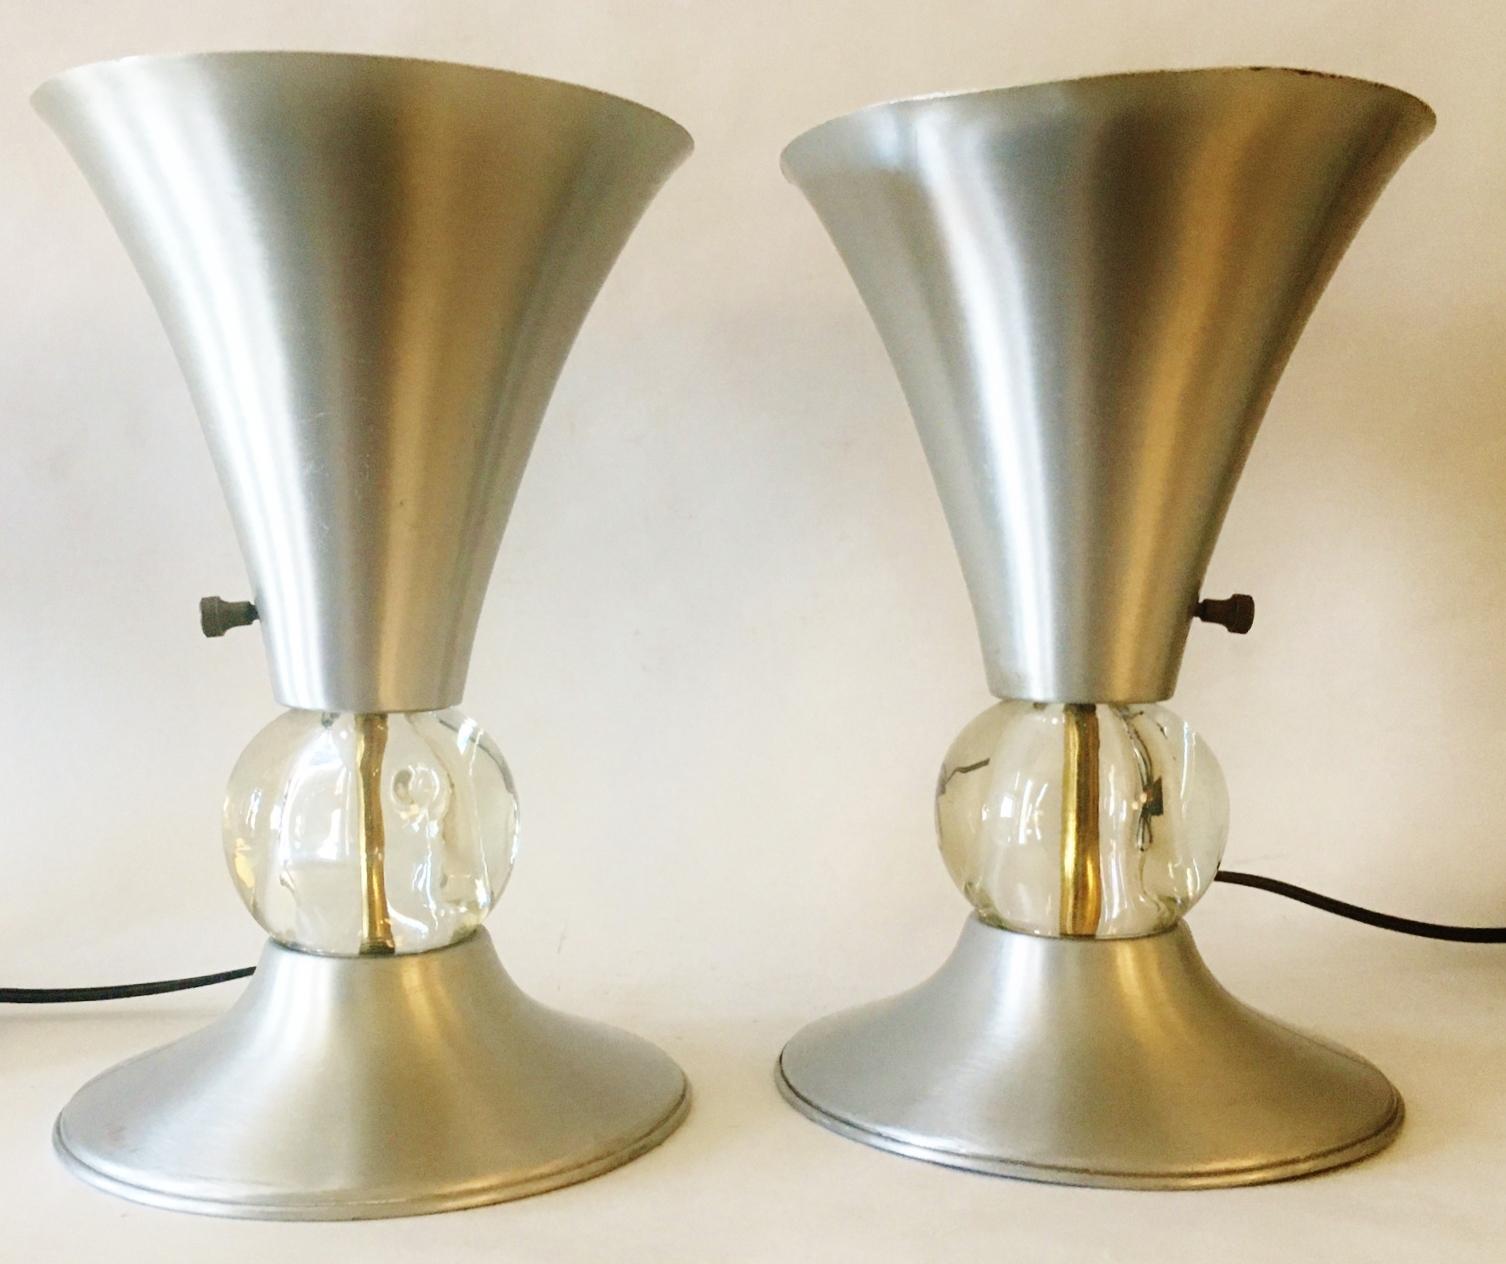 This hard to find pair of American Art Deco spun aluminum small table torchiers have unusually flared and ridged bases that support their equally flared trumpet torchiere shades. The spun aluminum shades and bases are each intersected by 3